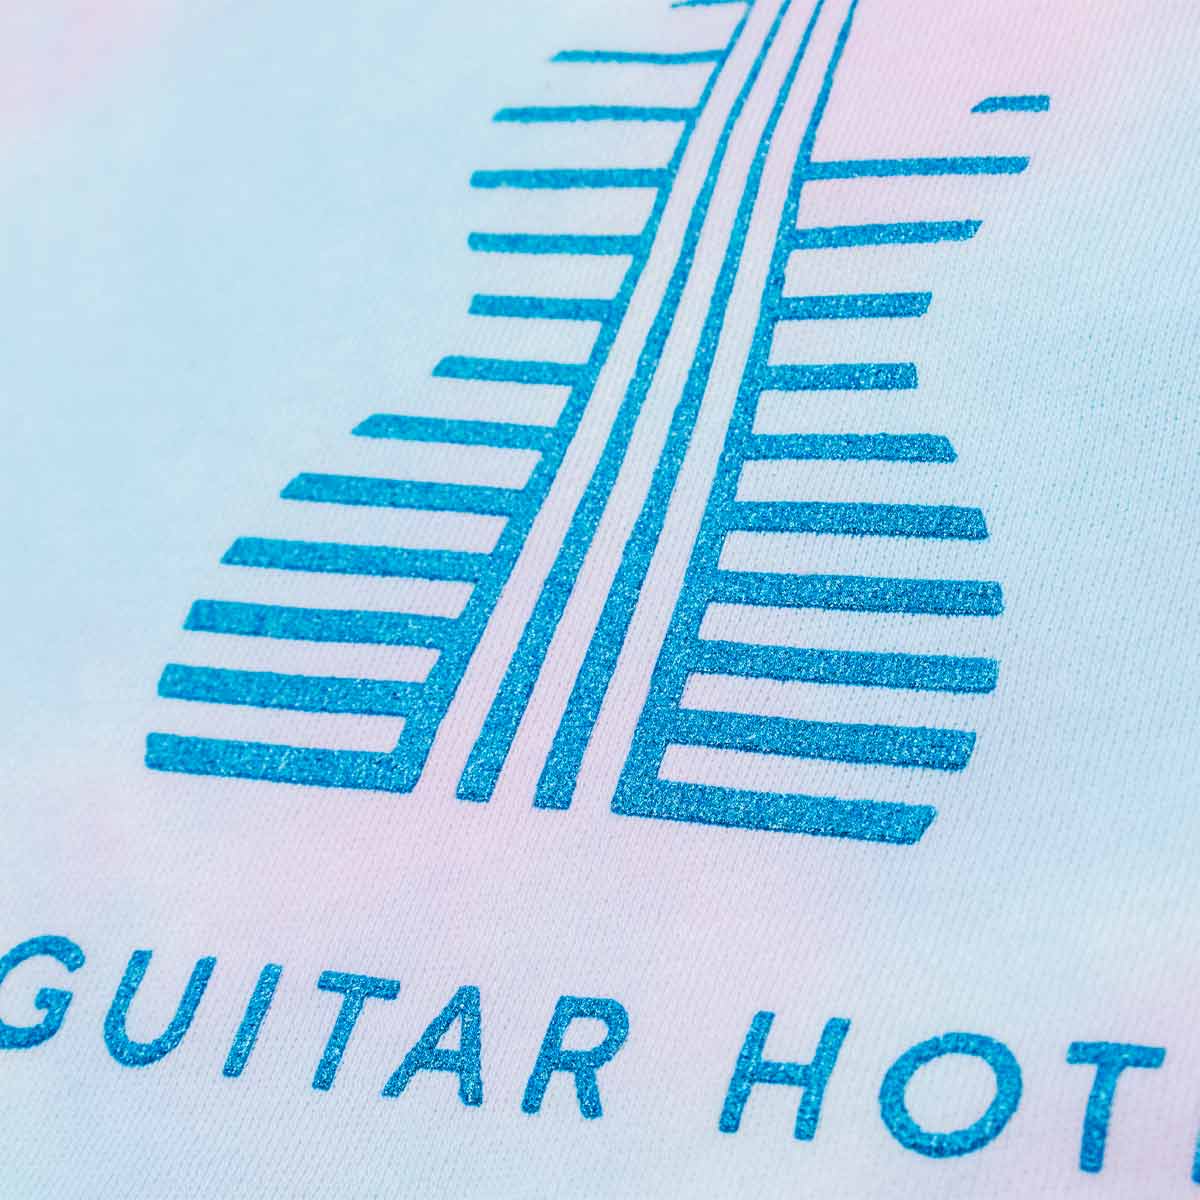 Guitar Hotel Cotton Candy Cropped Sweatshirt image number 2